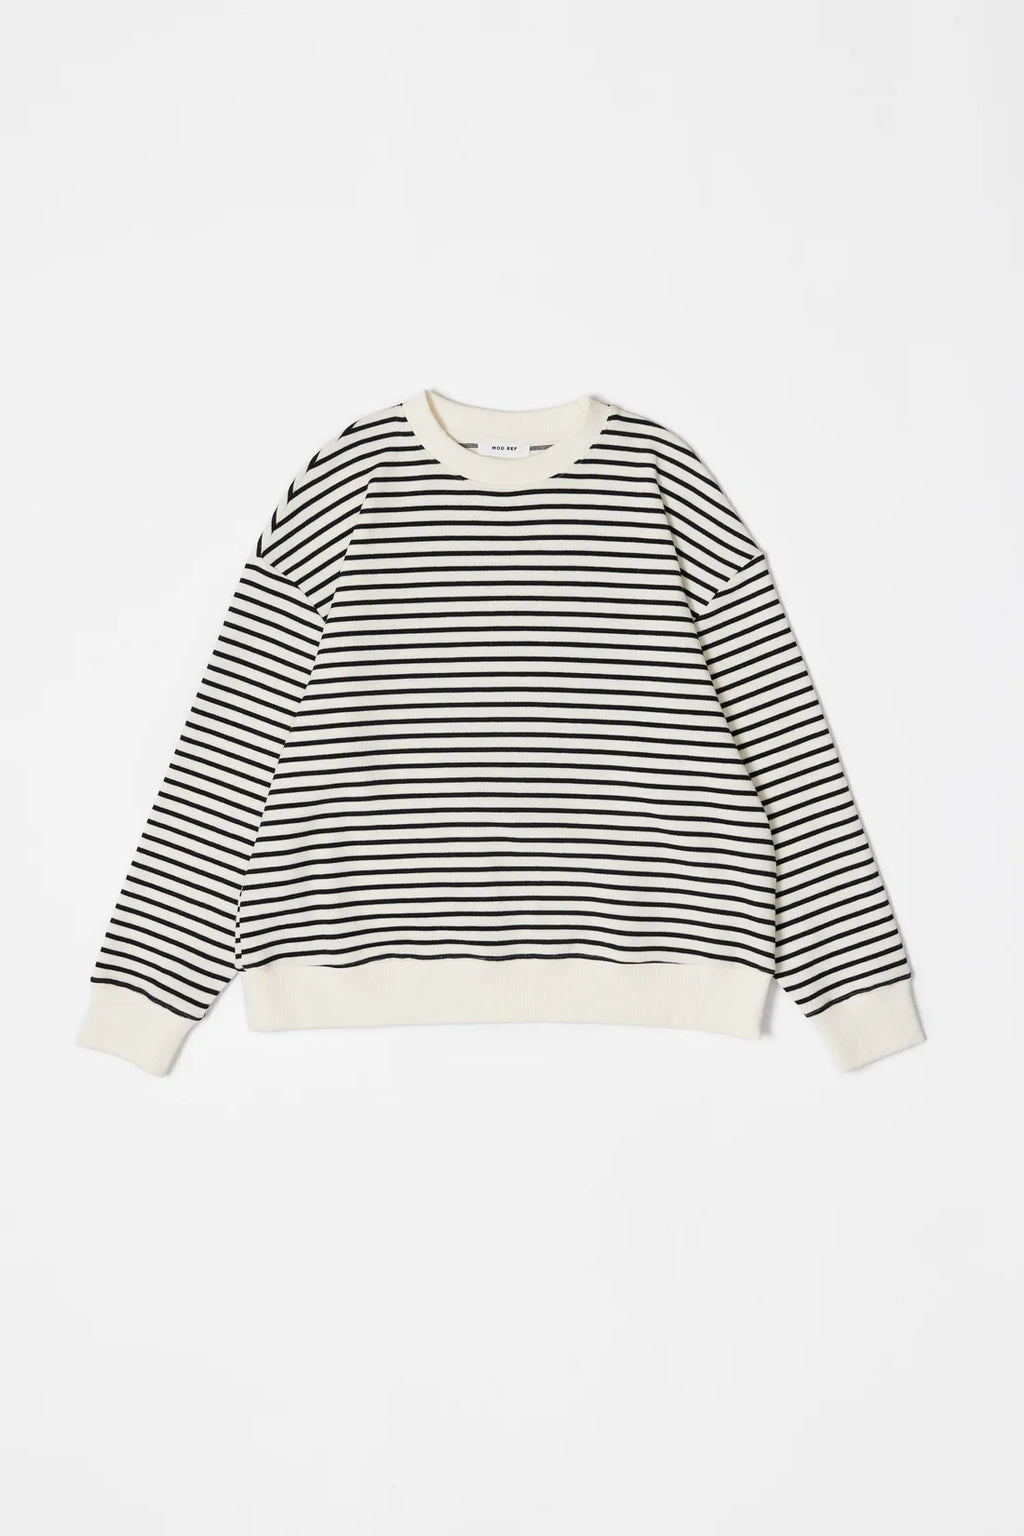 Emery Sweater in Cream and Black Stripes